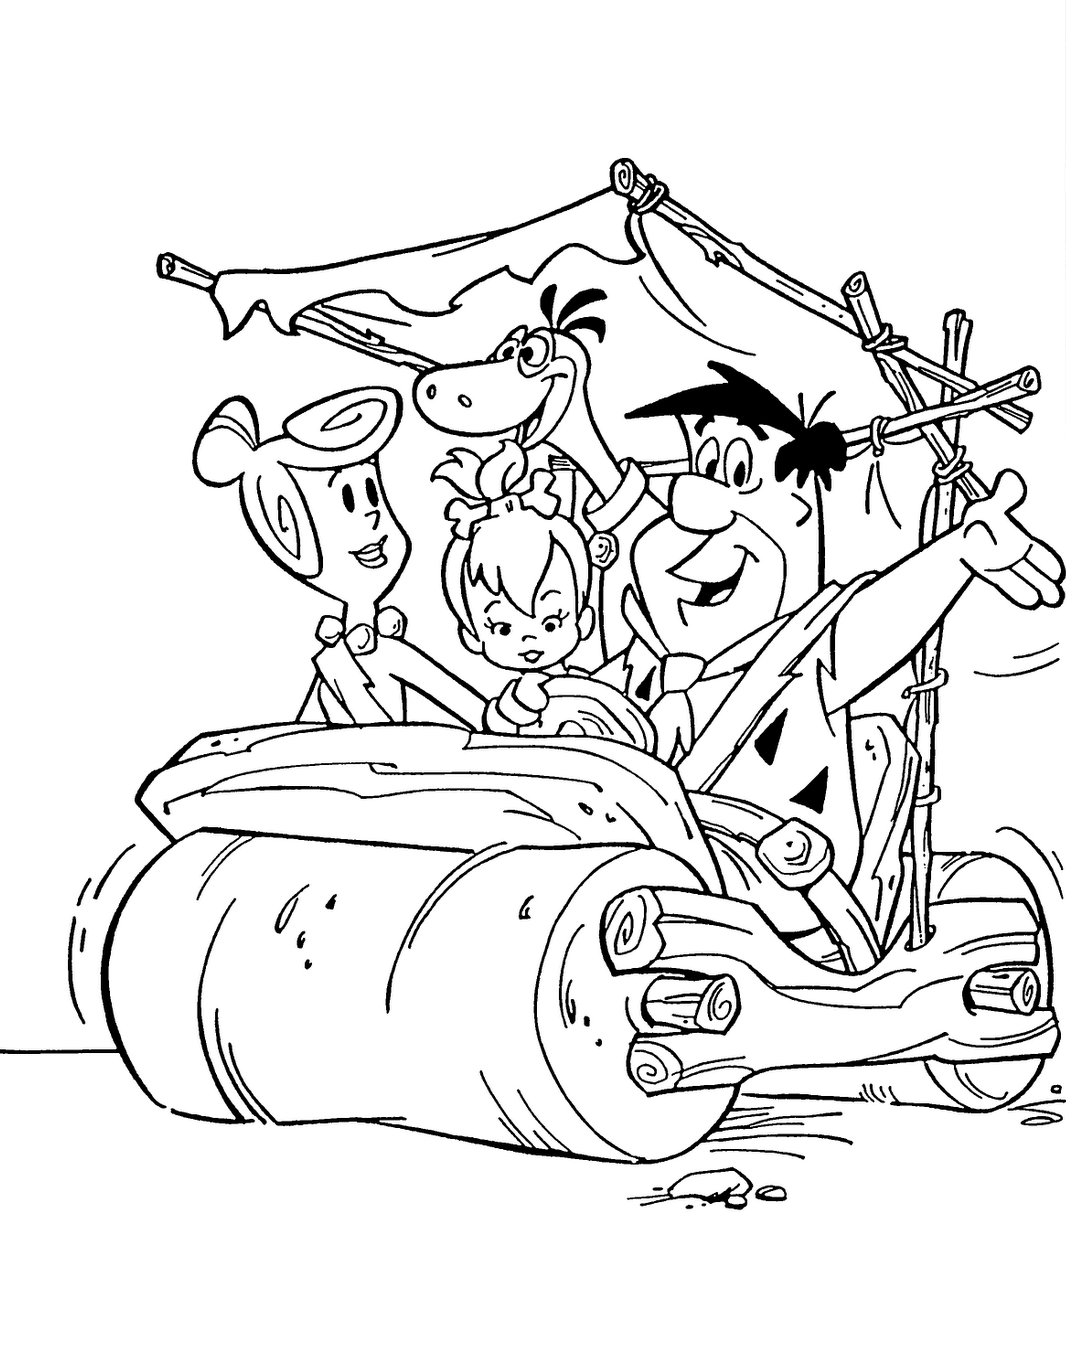 Cartoon Flintstones Coloring Pages | Cartoon Coloring pages of ...